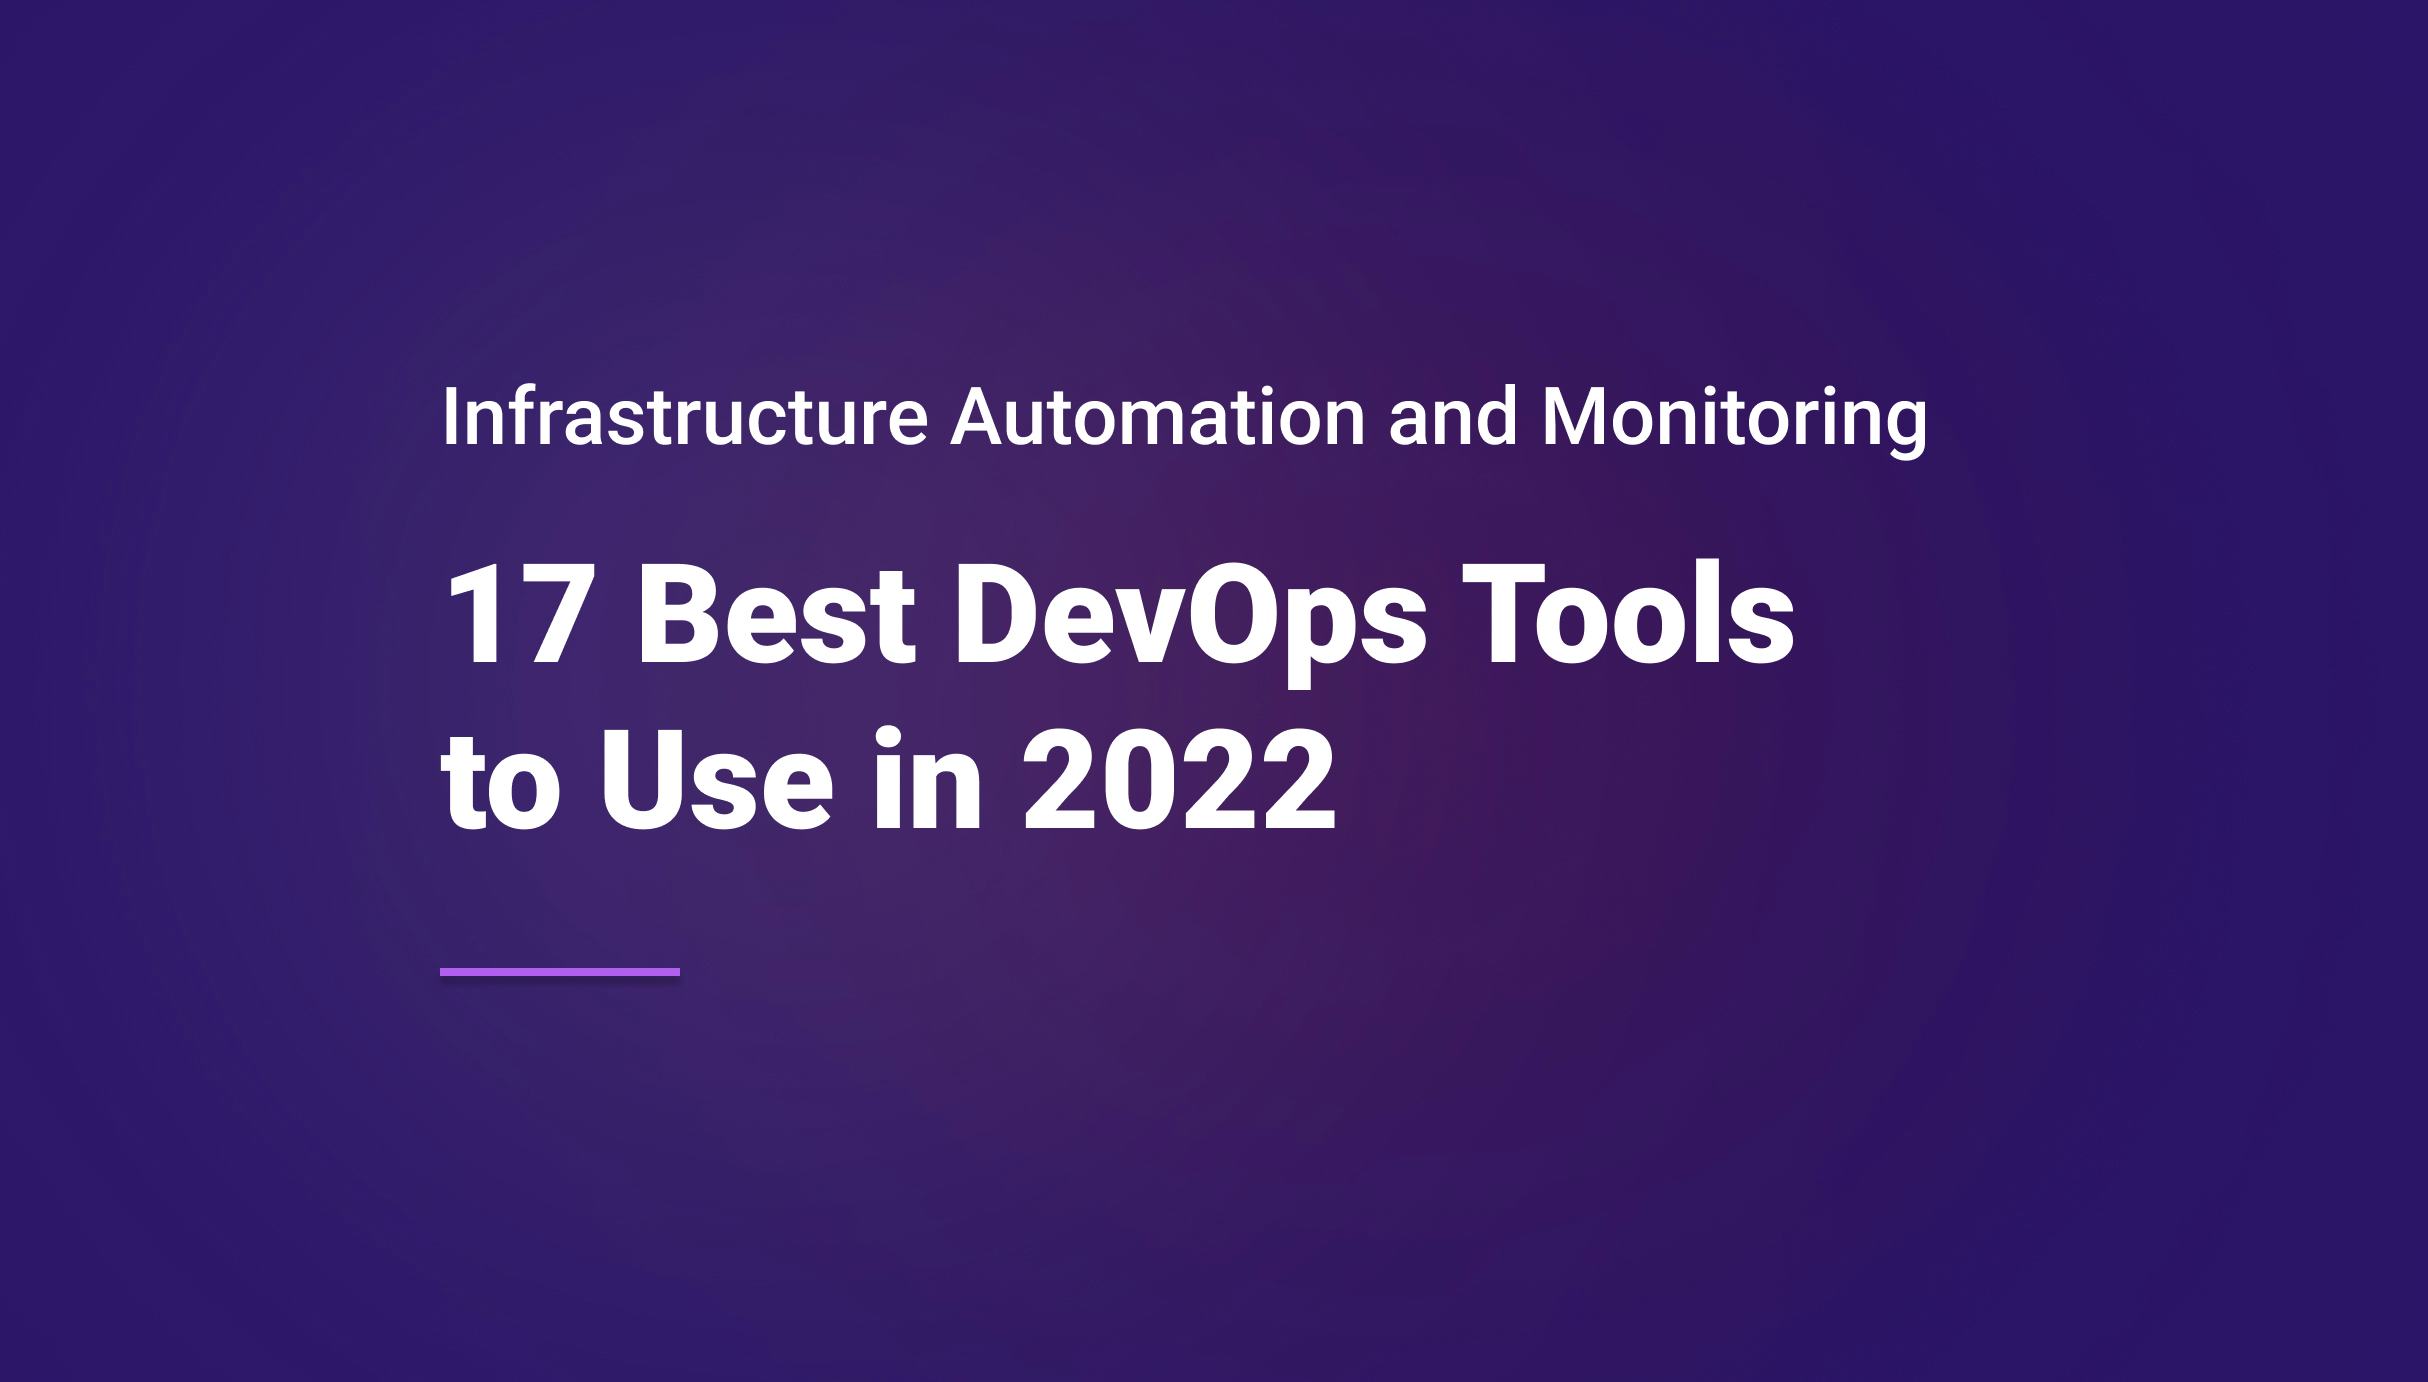 17 Best DevOps Tools to Use in 2022 for Infrastructure Automation and Monitoring